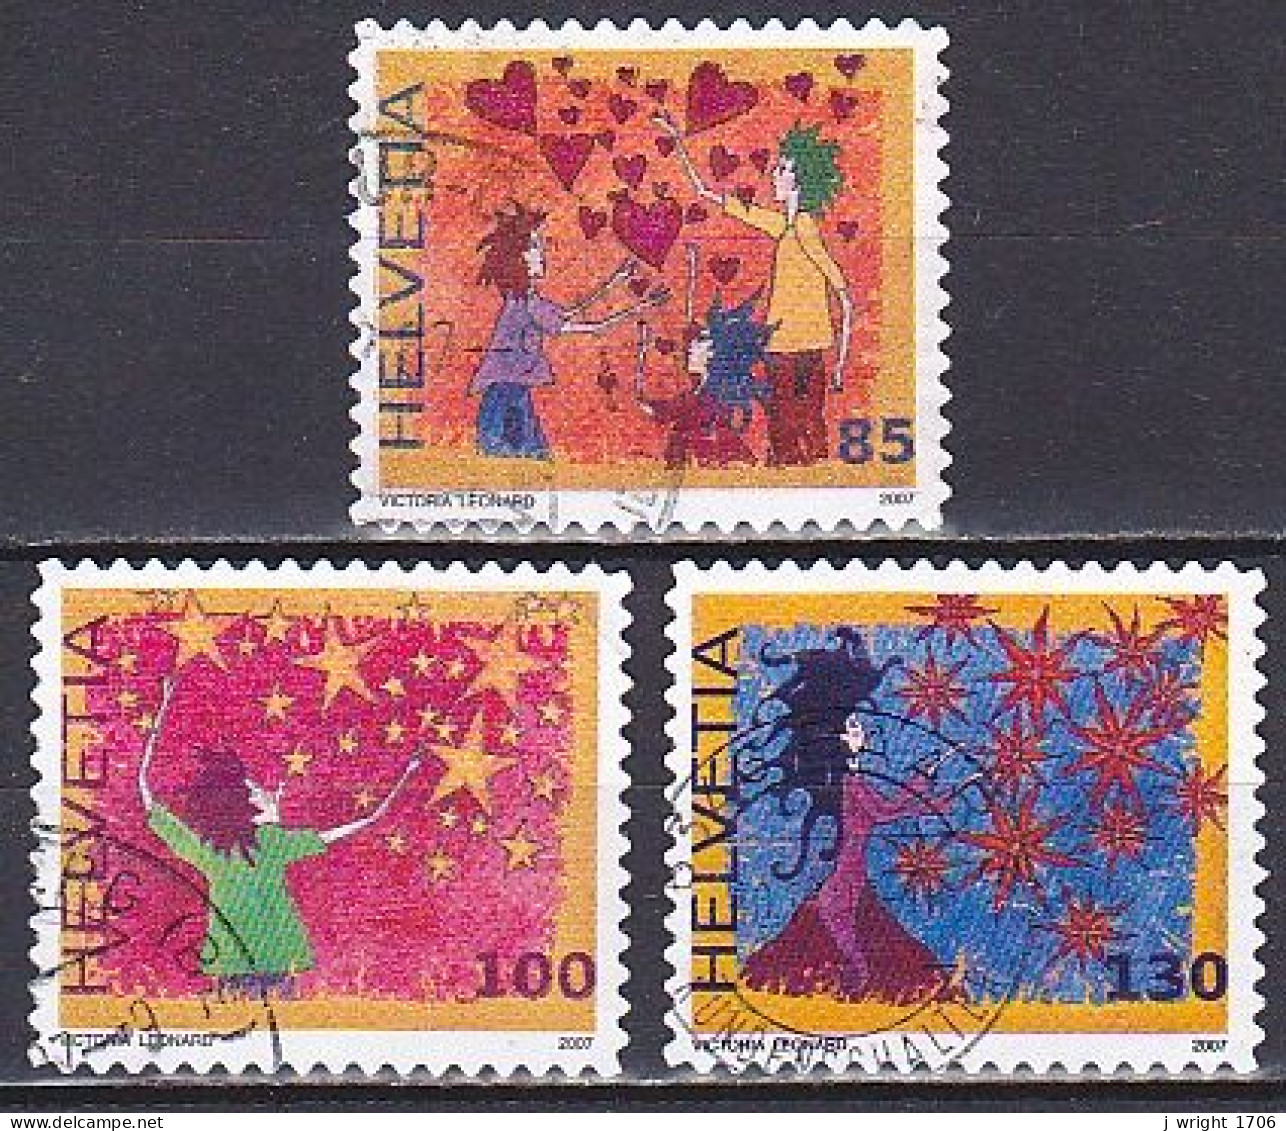 Switzerland, 2007, Congratulations, Set, USED - Used Stamps